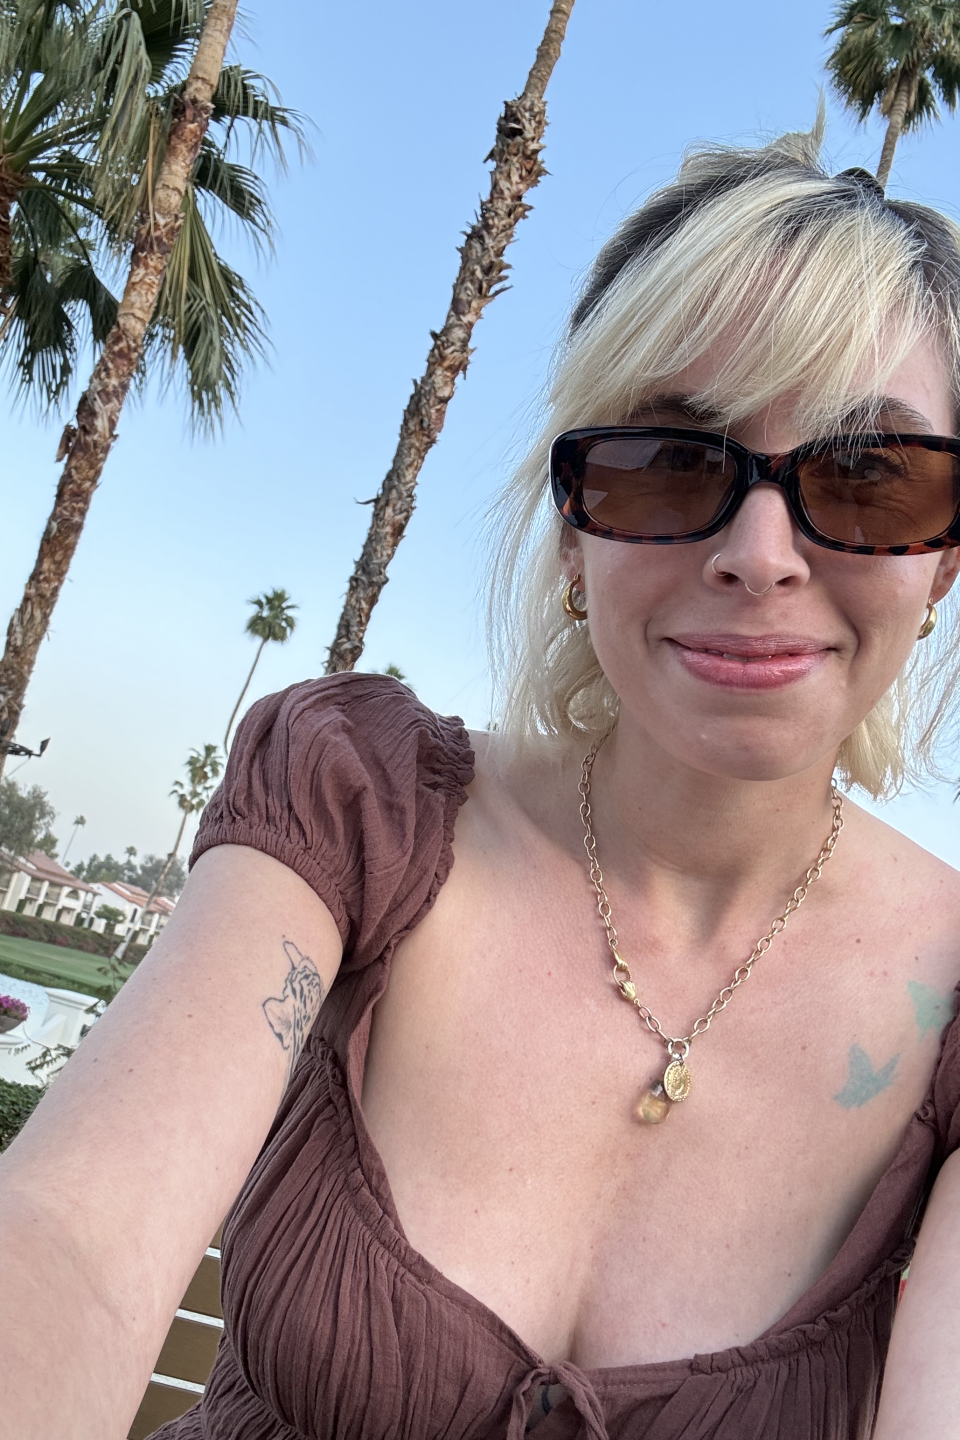 Woman in sunglasses and puffy-sleeved top takes a selfie with palm trees and a clear sky in the background